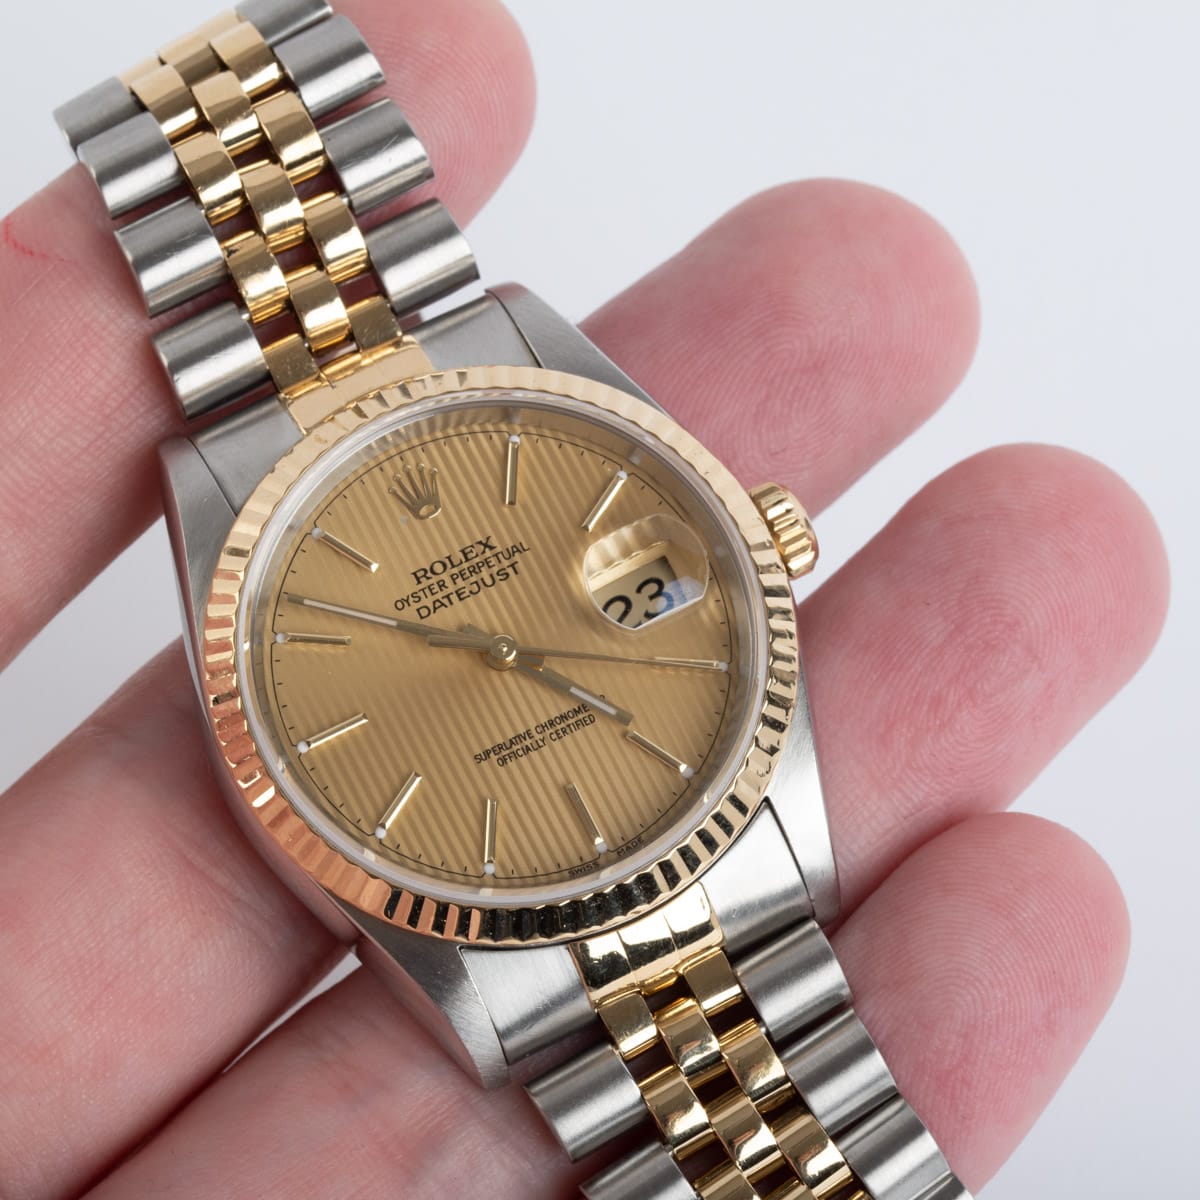 Extra Shot of Datejust 36